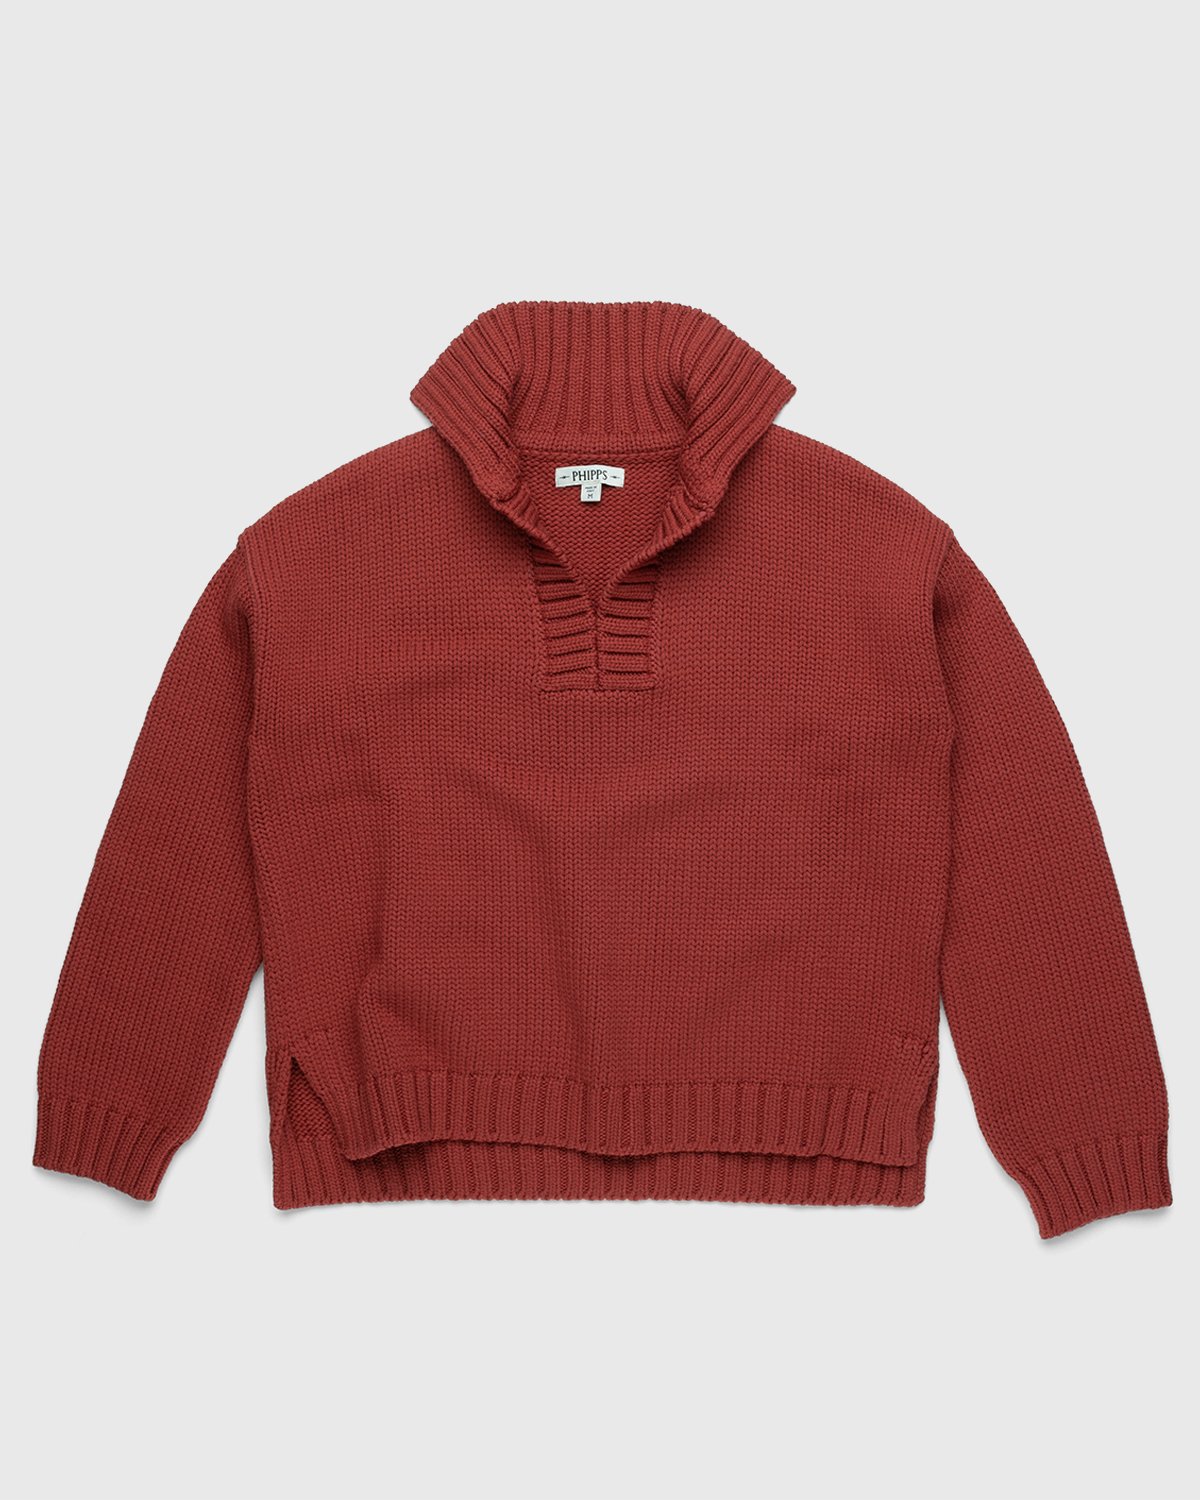 Phipps - Vareuse Sweater Rust - Clothing - Red - Image 1